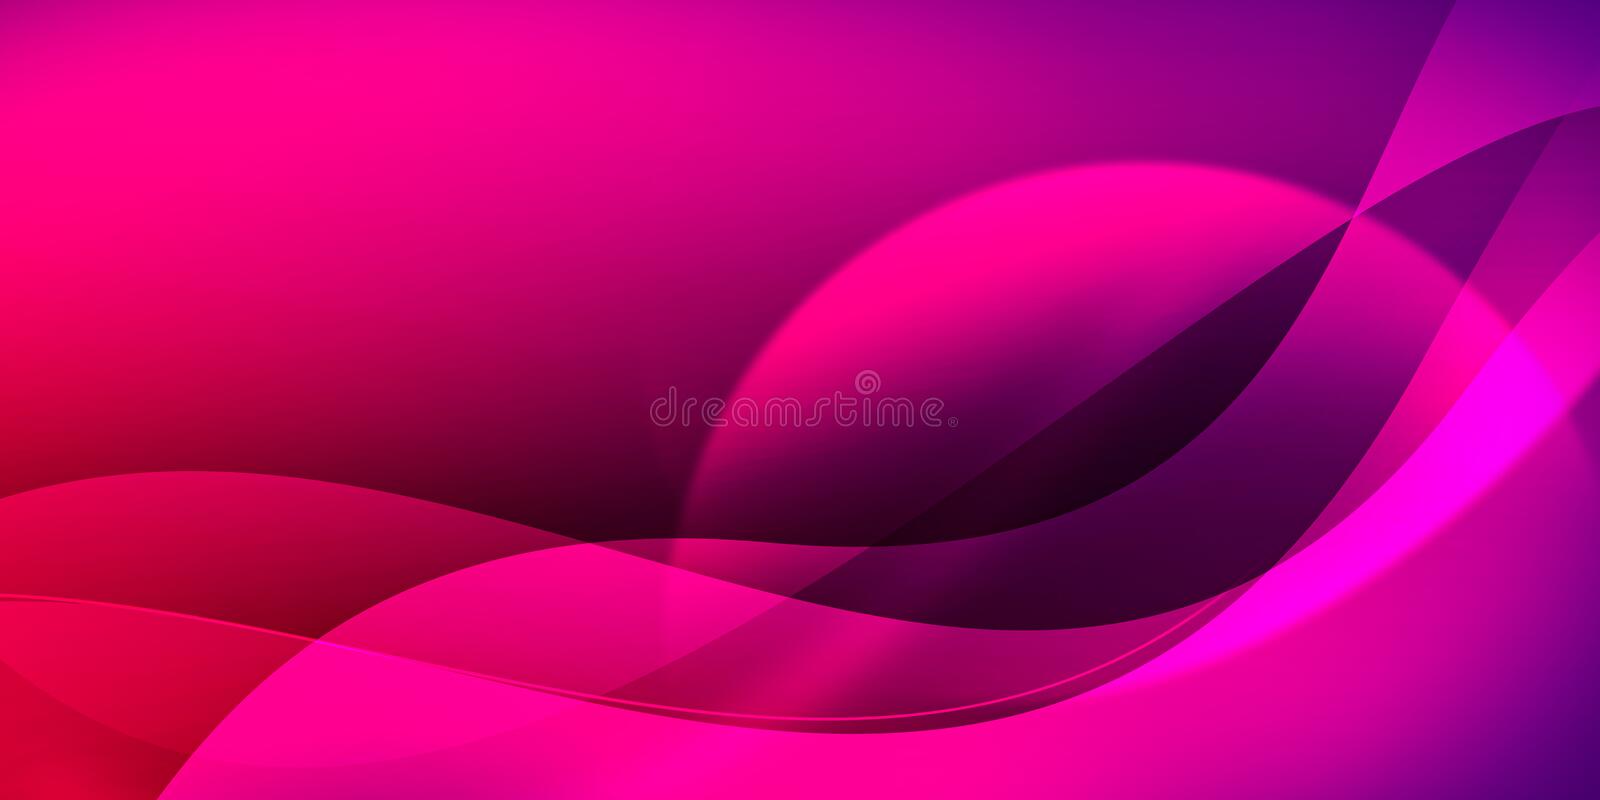 Pink and purple bination color abstract shapes modern background concept new wallpaper shapes design stock illustration